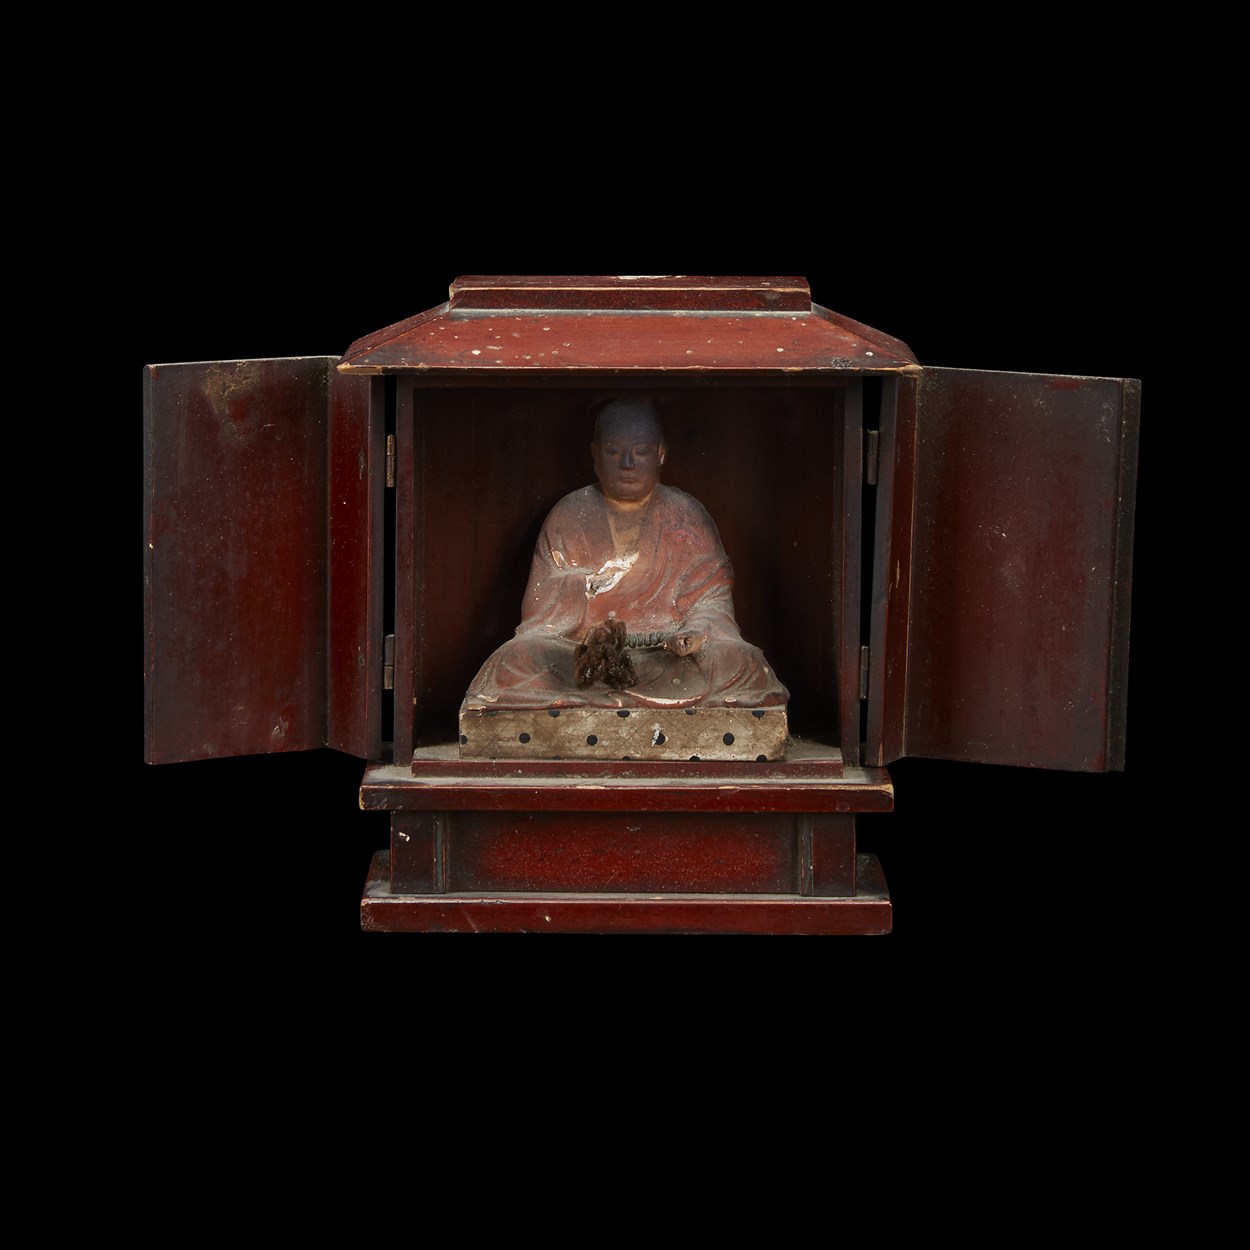 Lot 41 - A Japanese red-lacquered Buddhist shrine, enclosing a monk